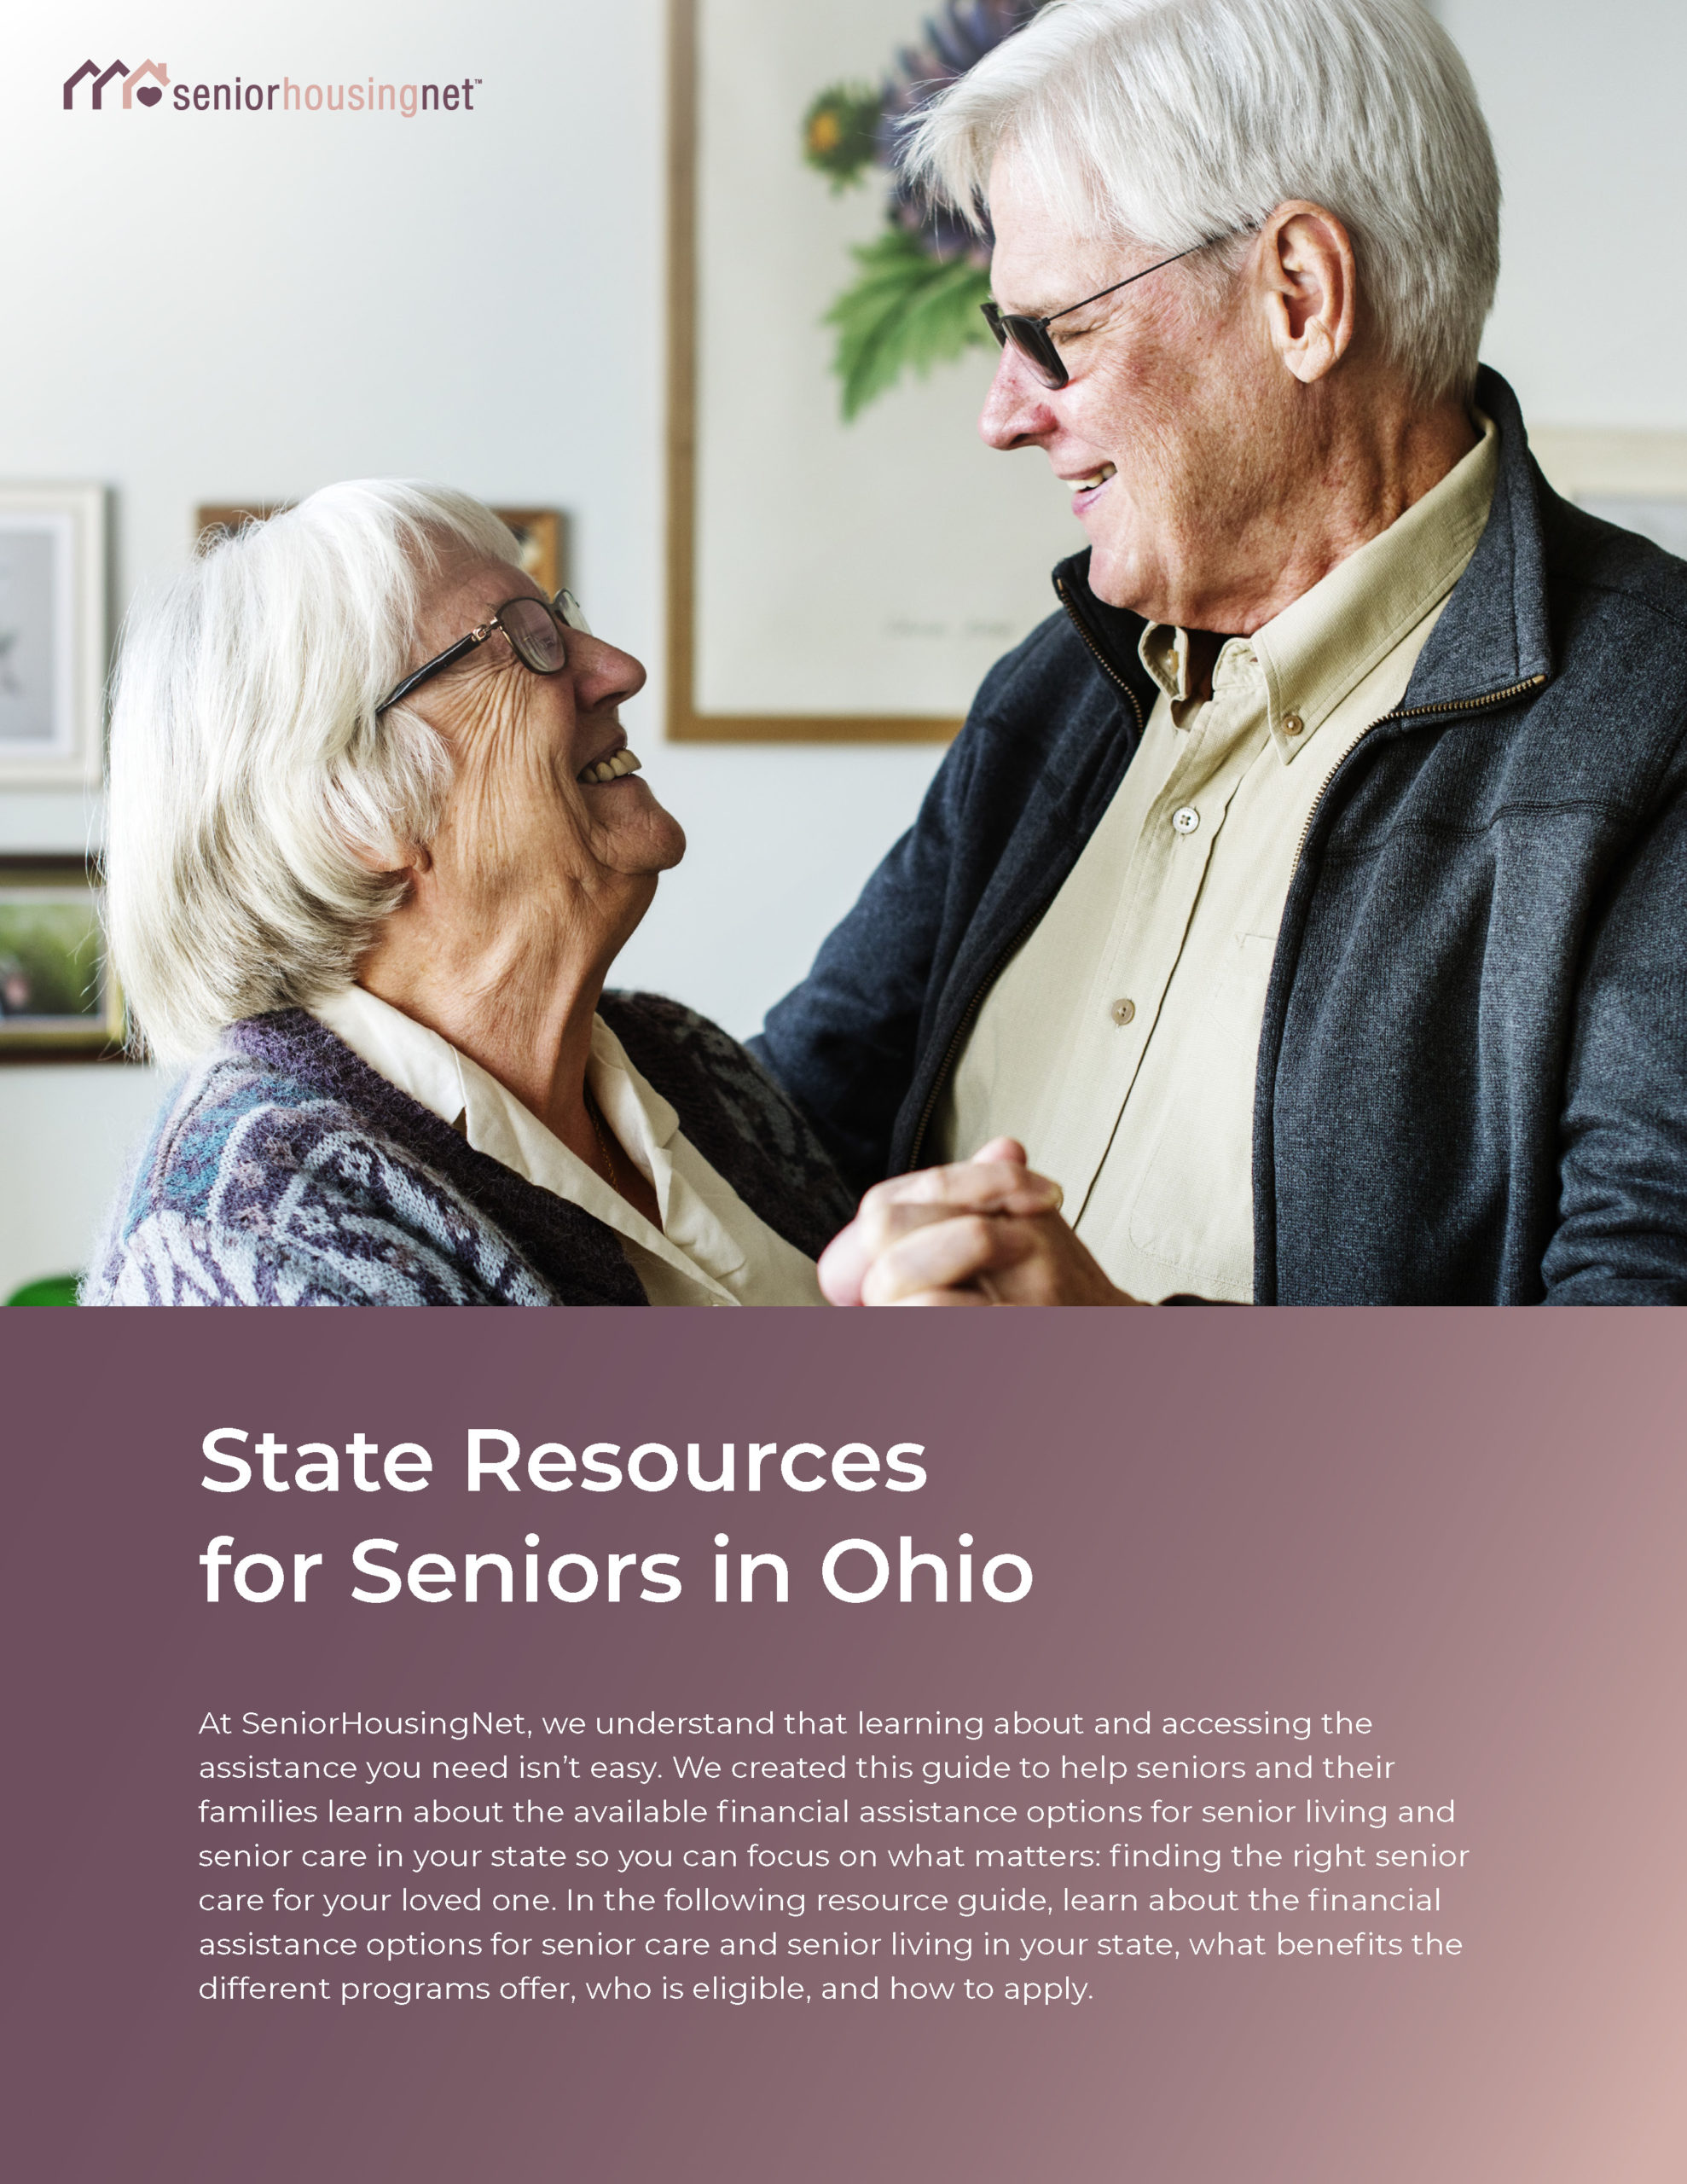 State Resources for Seniors in Ohio